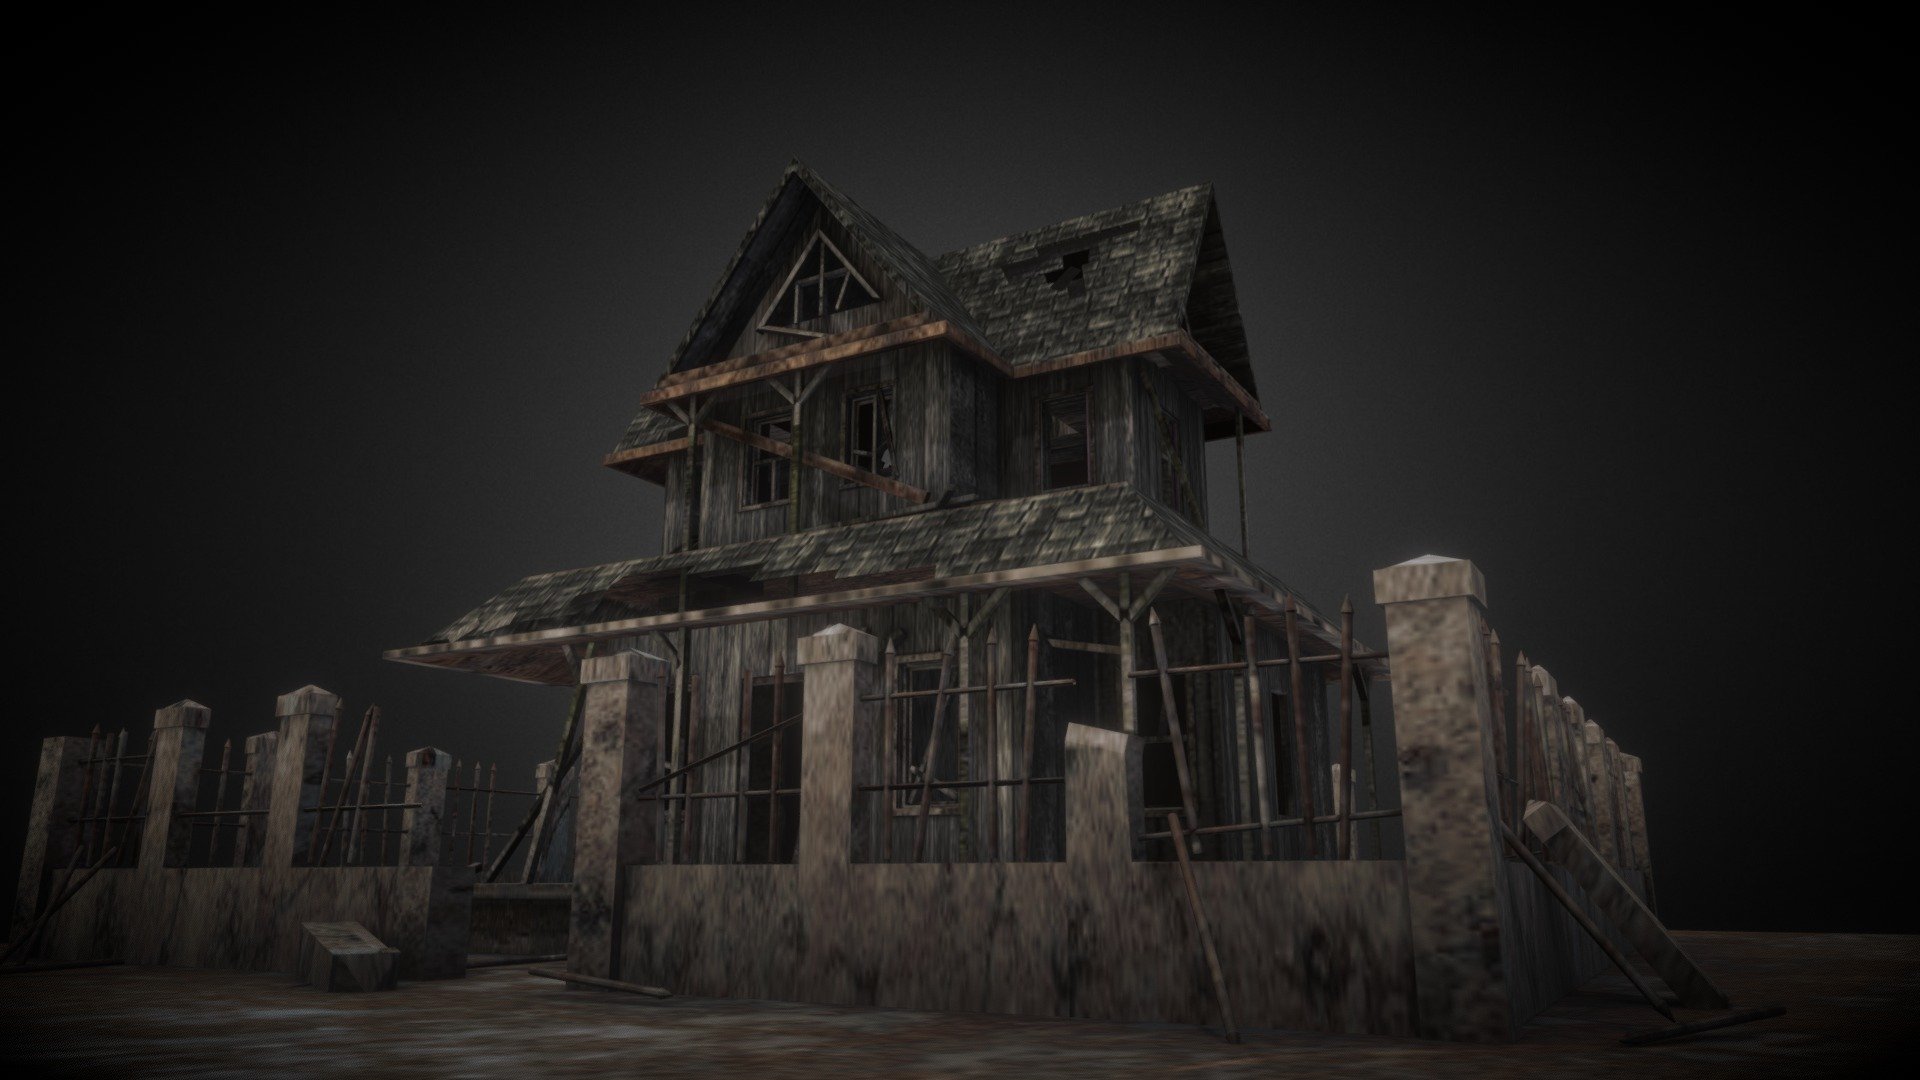 DILAPIDATED HAUNTED HOUSE 1
IN STYLE OF AMERICAN PRAIRIE GOTHIC
INSPIRED BY AMYTIVILLE
THE TEXTURES ARE NOT THE BEST - WIP IN PROGRESS - Old HAUNTED ABANDONED HOUSE RUIN - 3D model by #digitalartworm (@fahycolm) 3d model